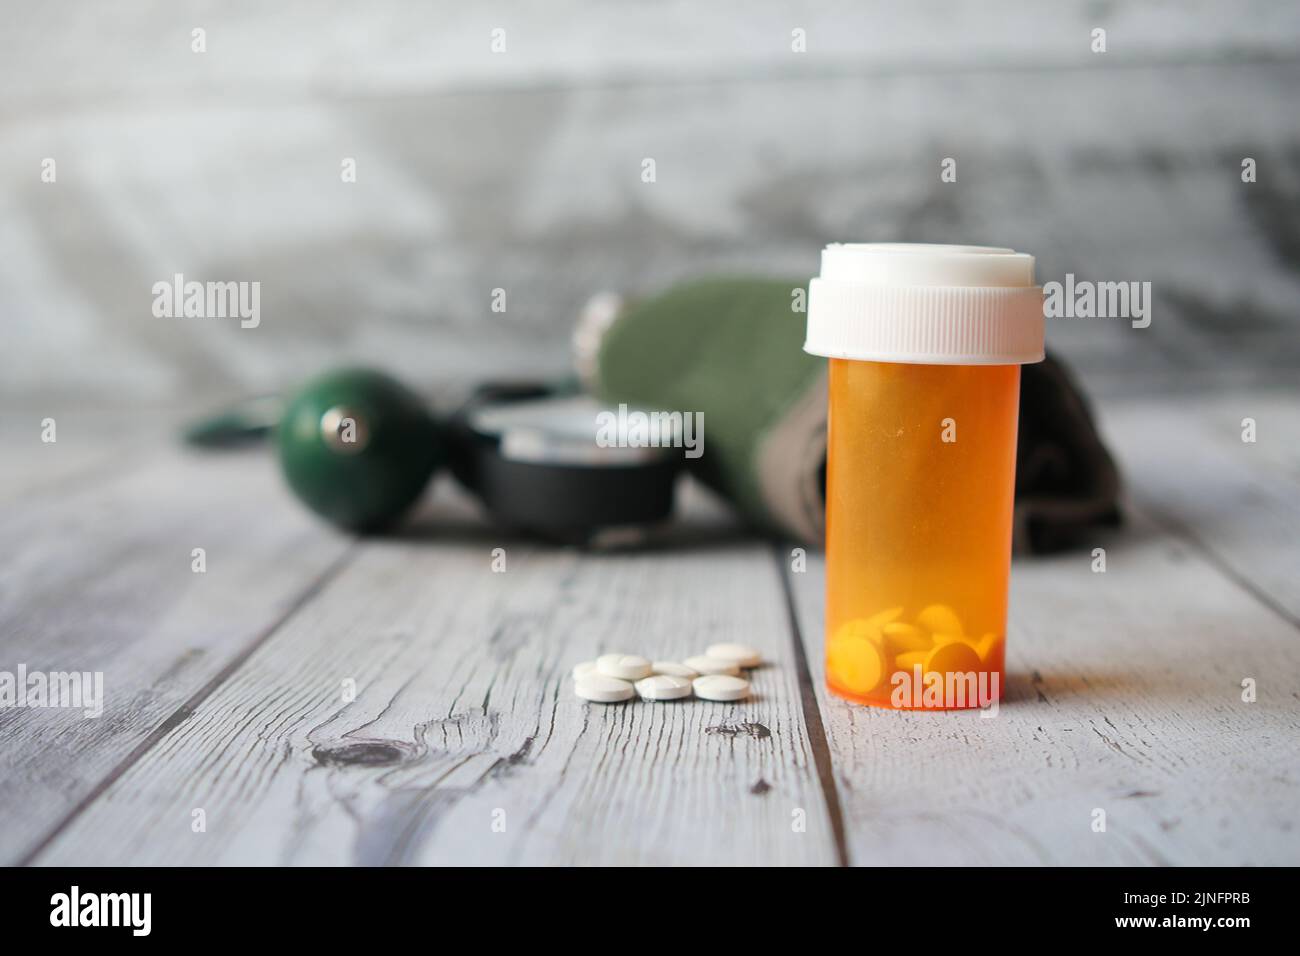 medical pills and blood pressure machine on table  Stock Photo